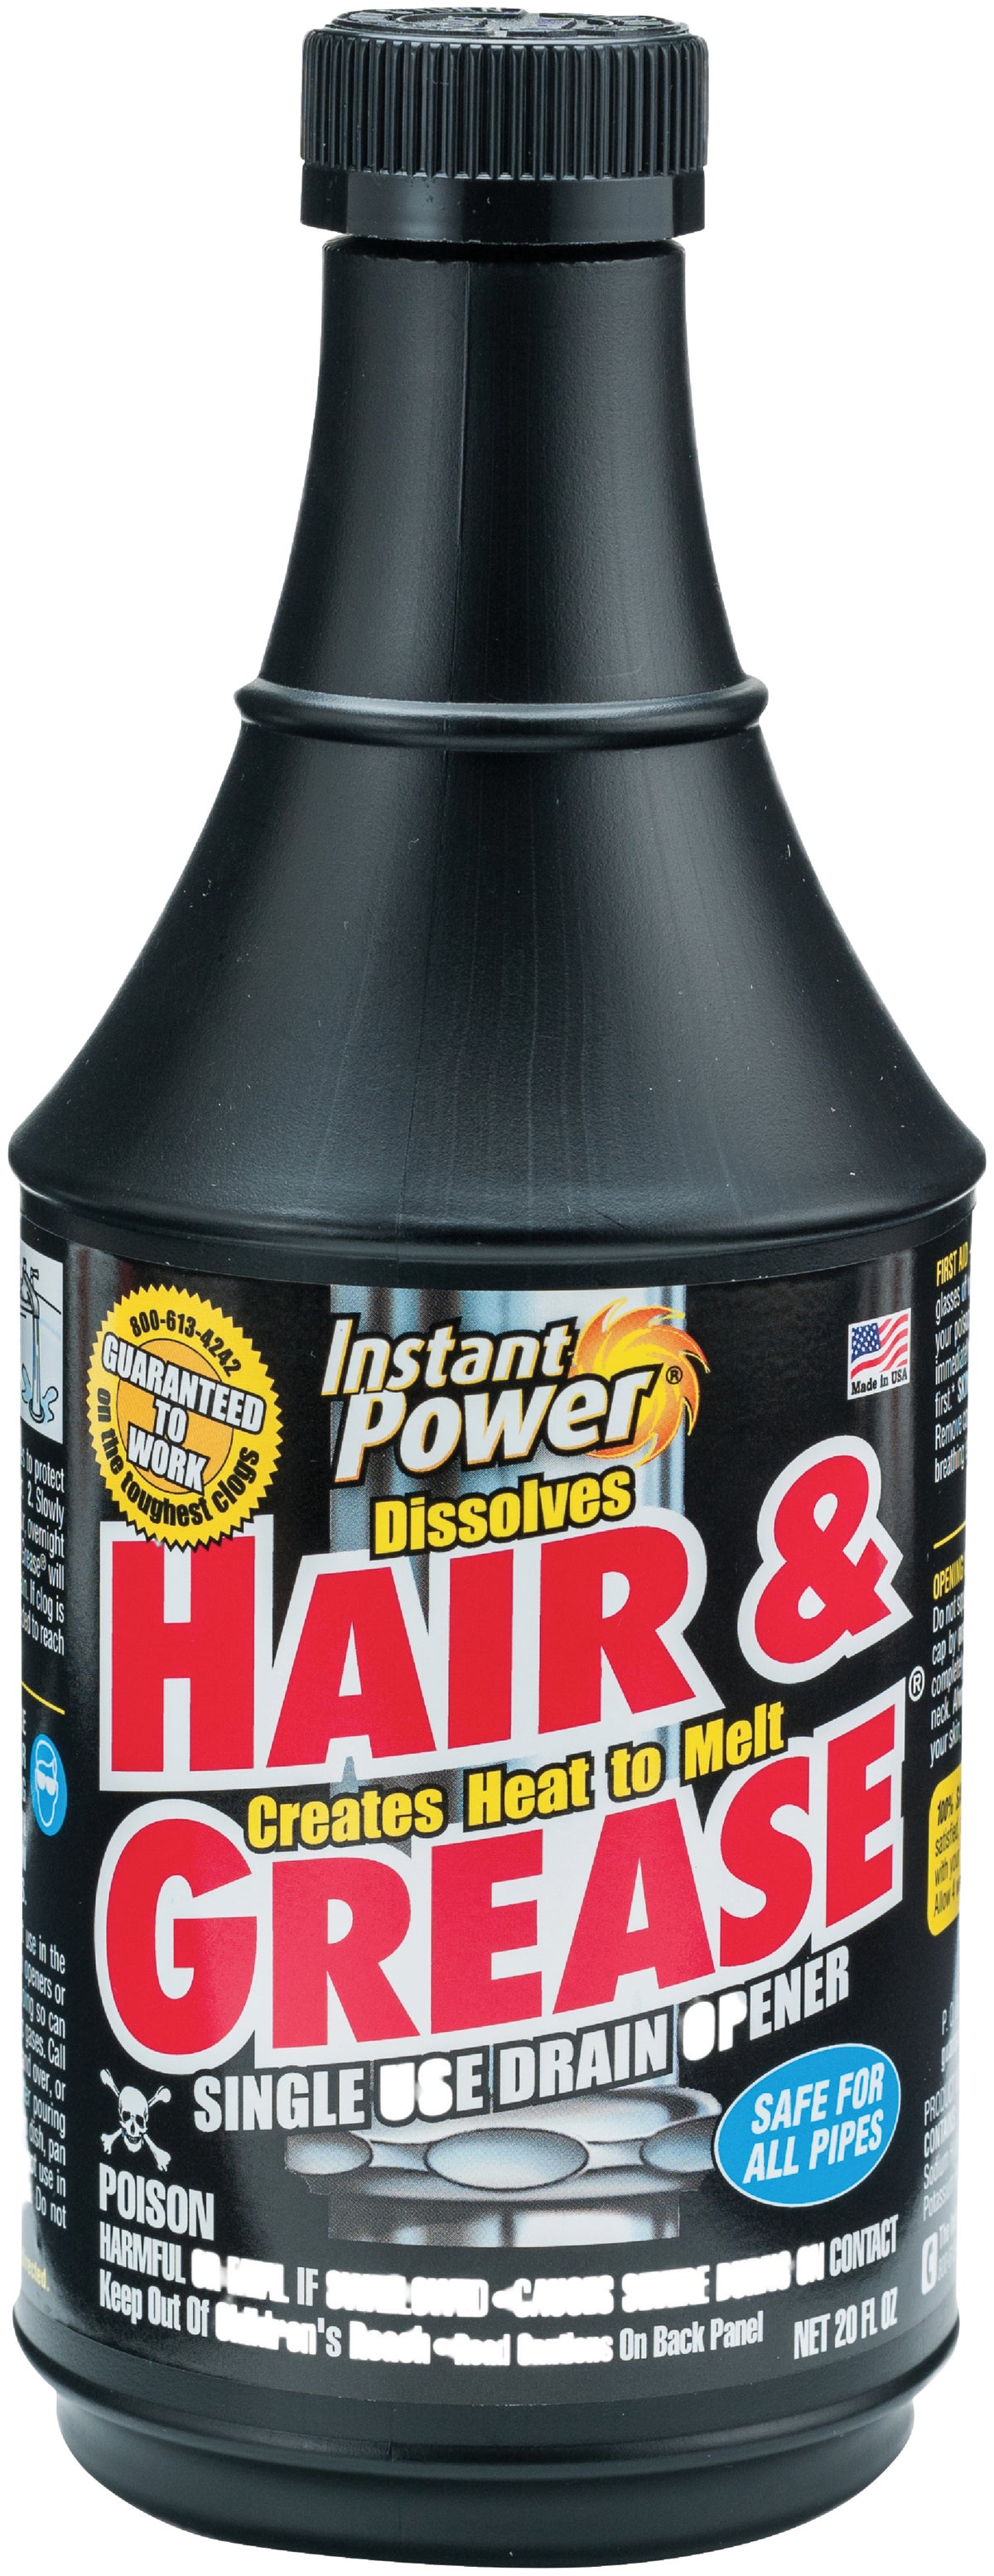 Instant Power Hair and Grease Drain Opener, Liquid Drain Cleaner and Clog  Remover, 20 oz.